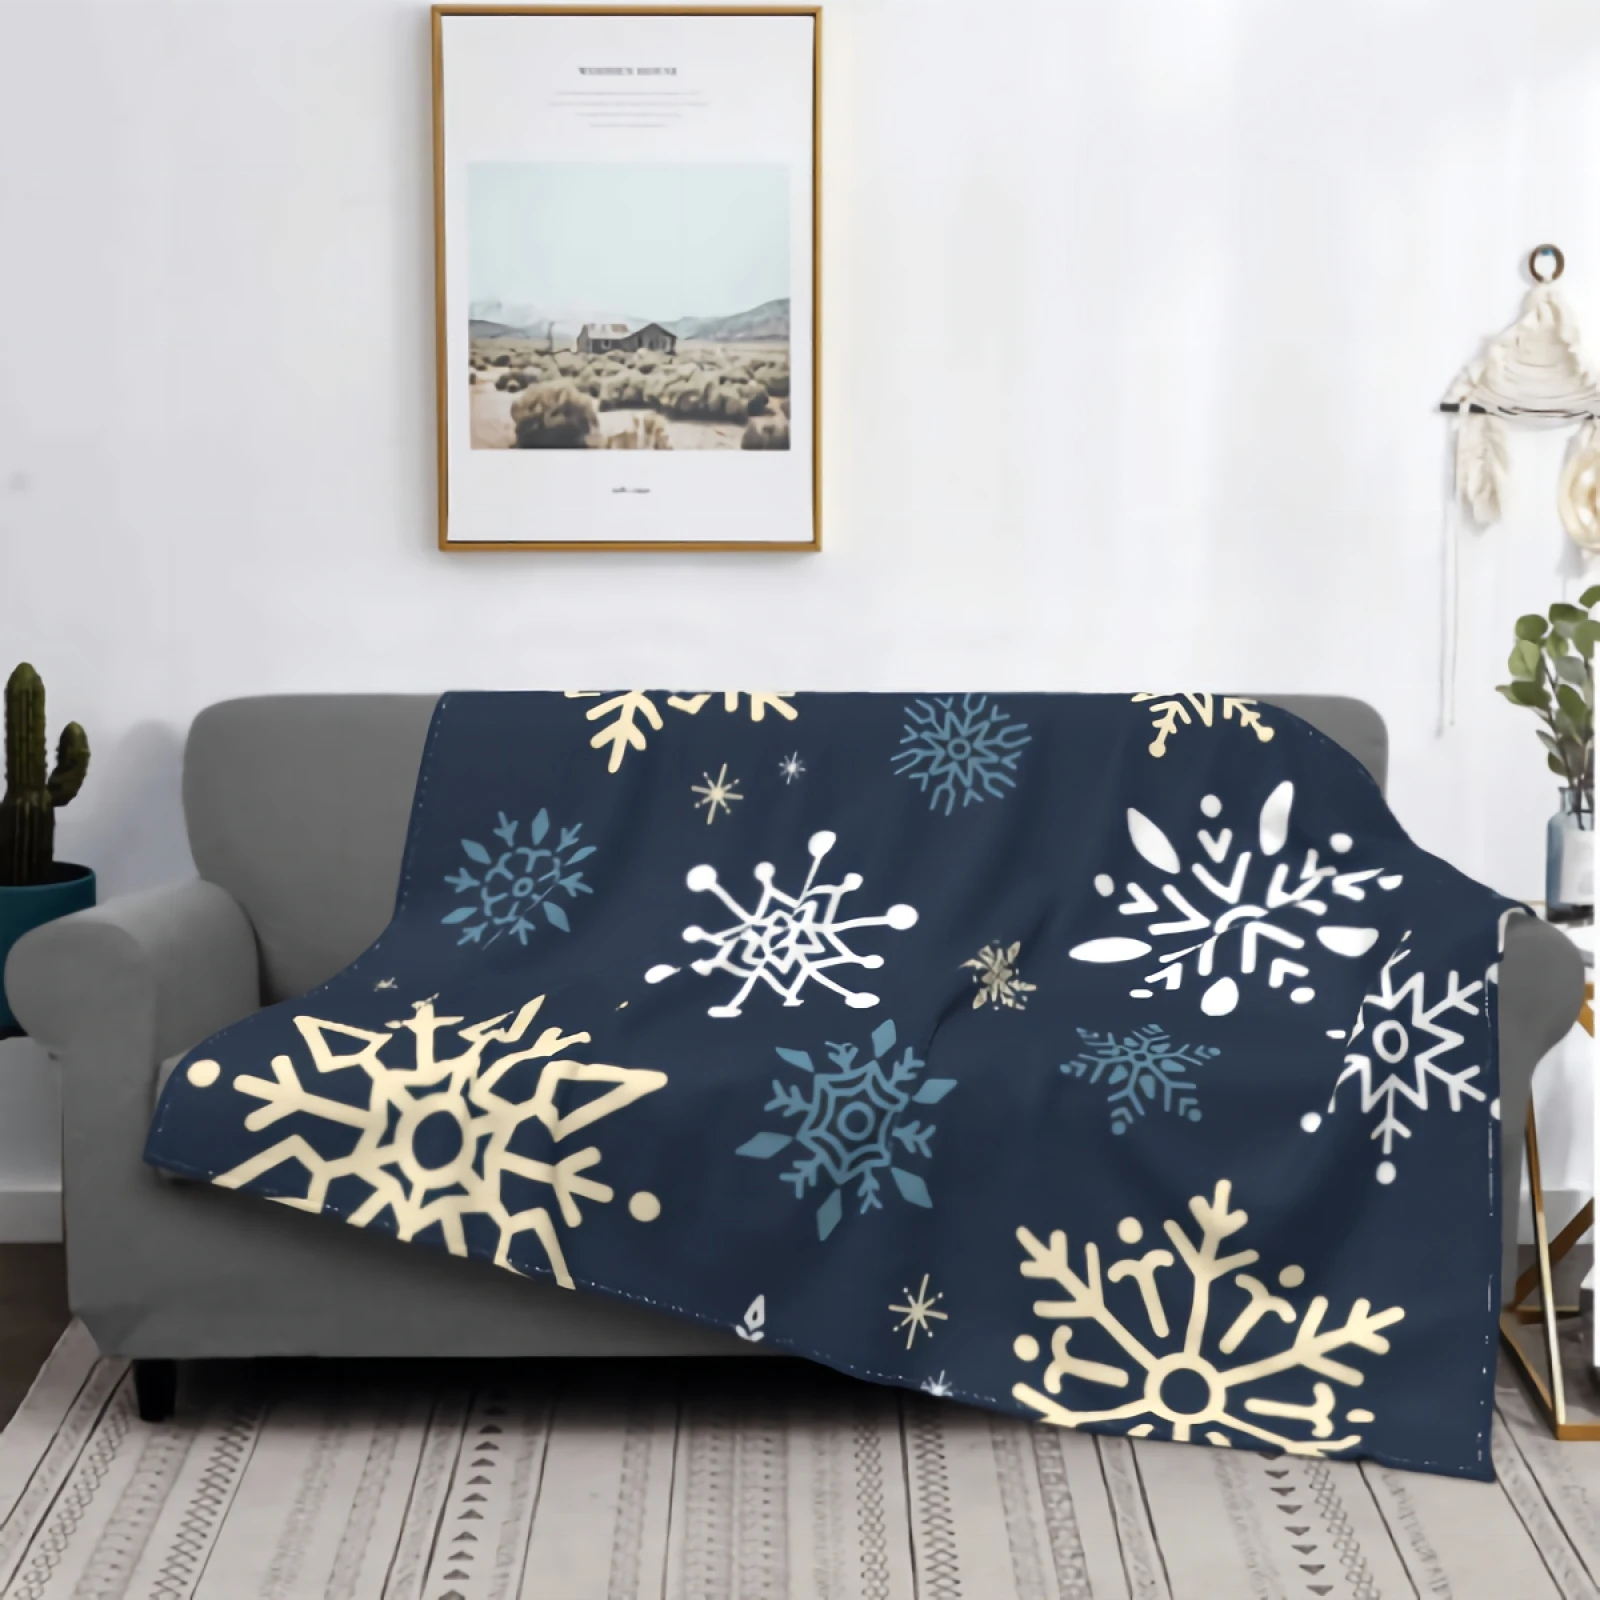 

Comfort Velvet Super Soft Snowflake Christmas Prints Blanket Home Décor Warm Throws for Winter Bedding Couch and Gift 60"x50"